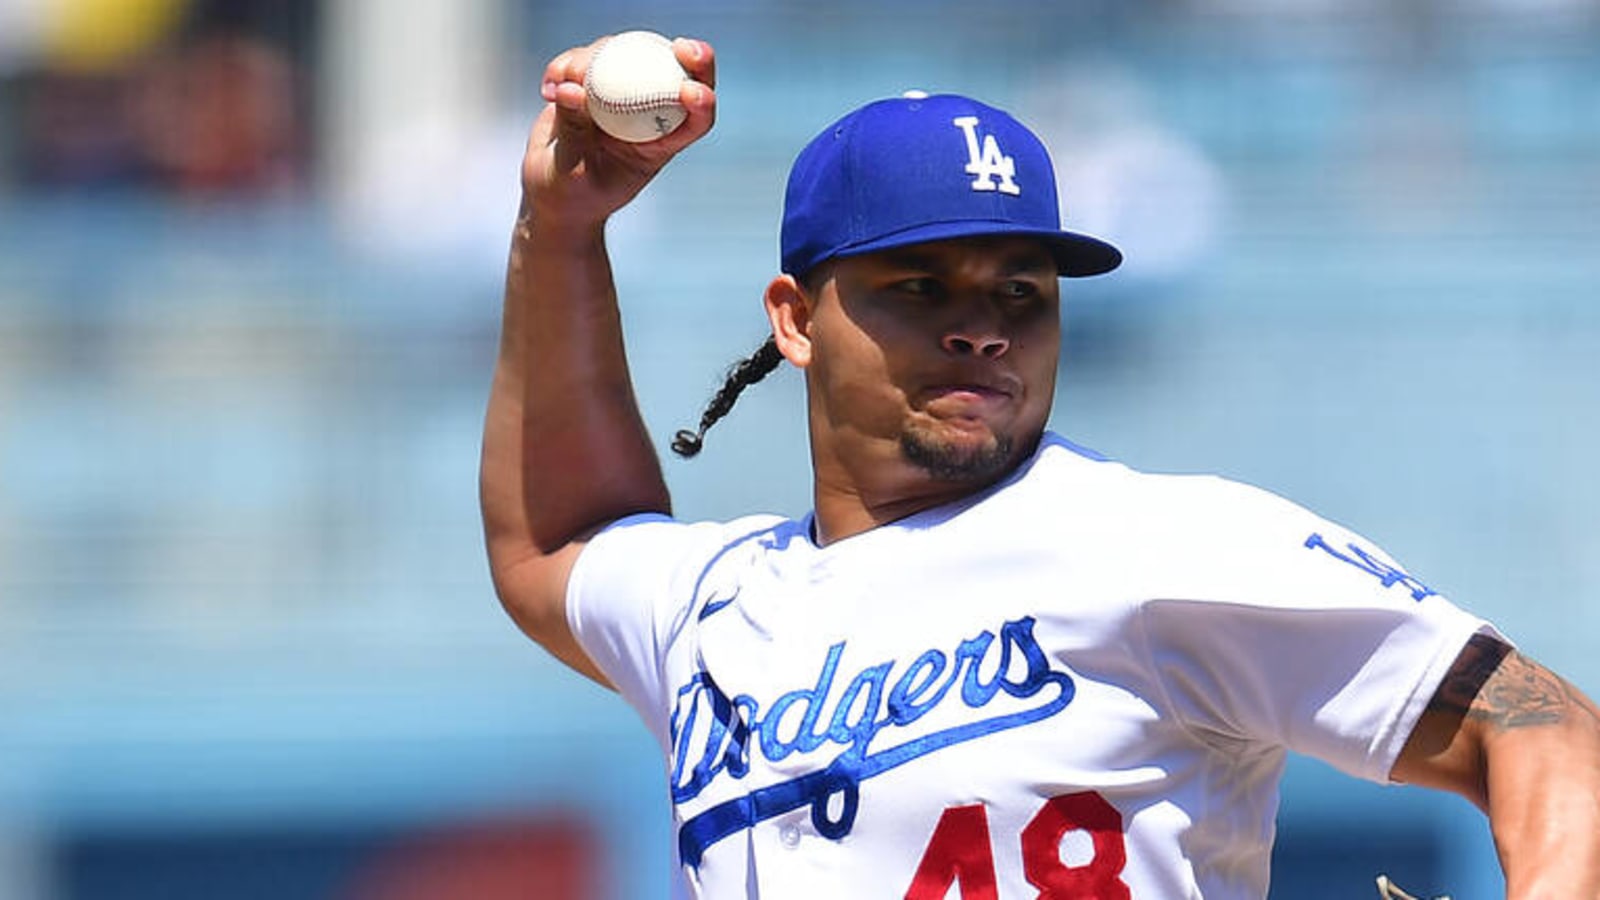 Dodgers' Graterol pulls funny move after fielding ball